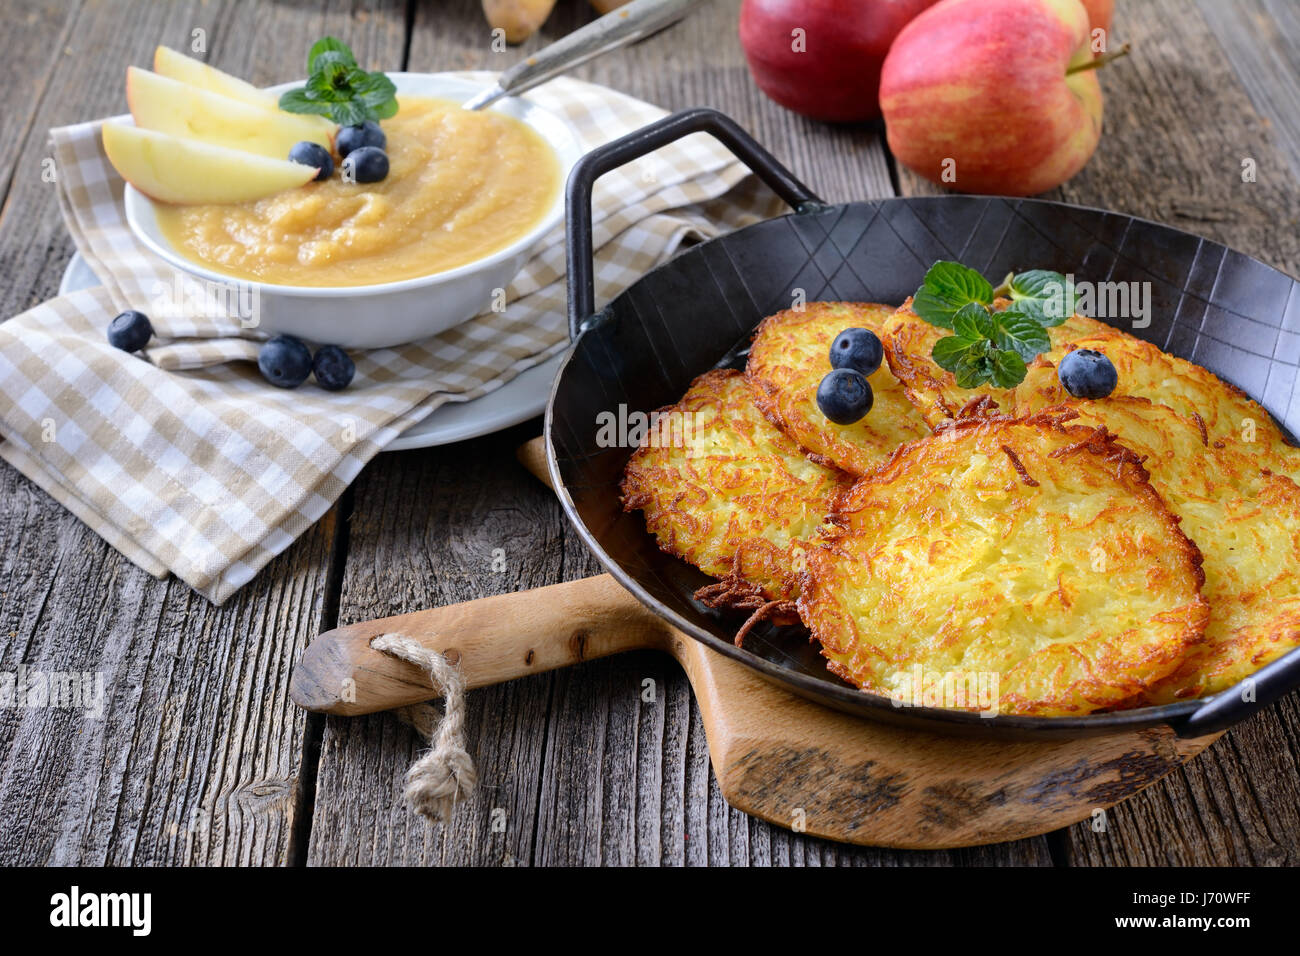 Homemade crispy fried potato pancakes served in an iron frying pan with apple sauce Stock Photo